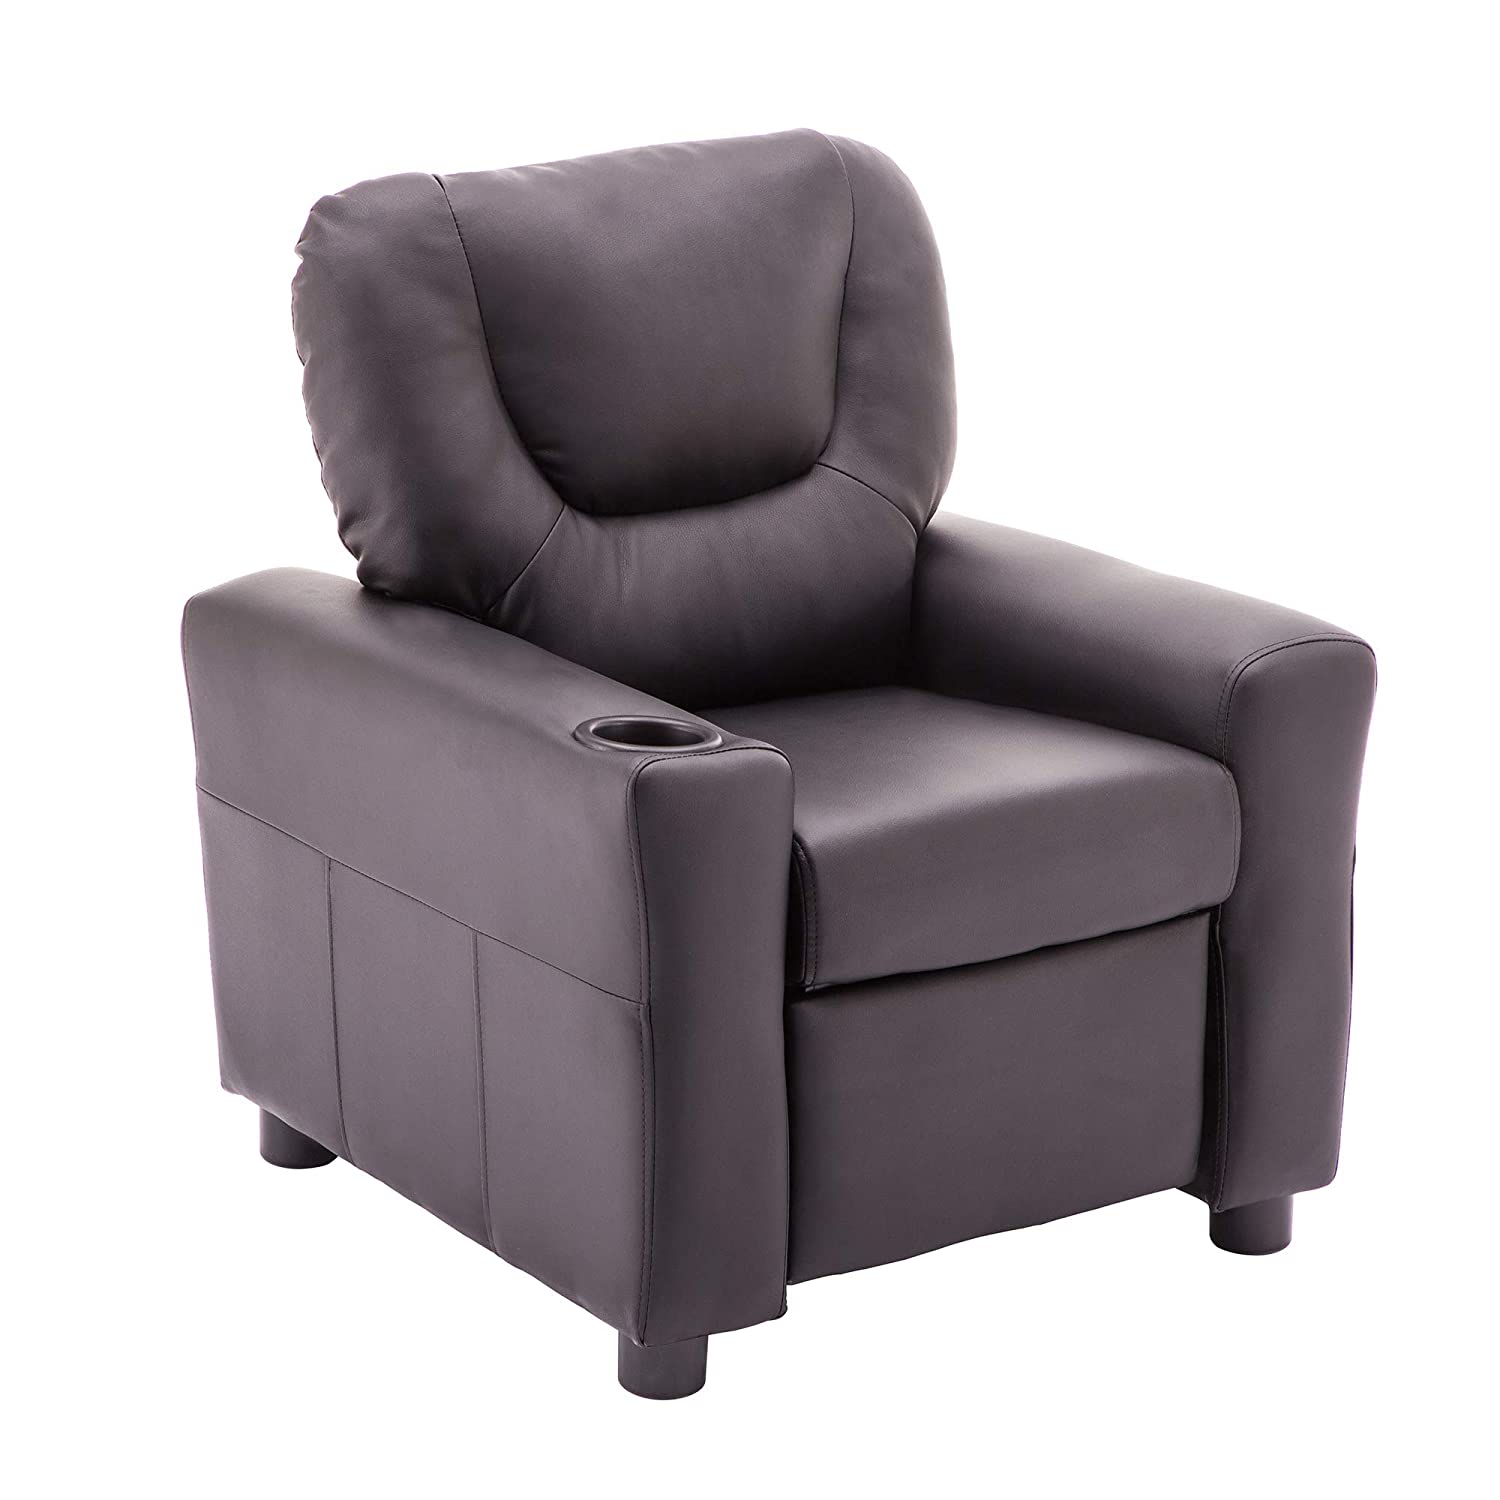 MCombo Kids Recliner Armchair Children's Furniture Sofa Seat Couch Chair w/Cup Holder